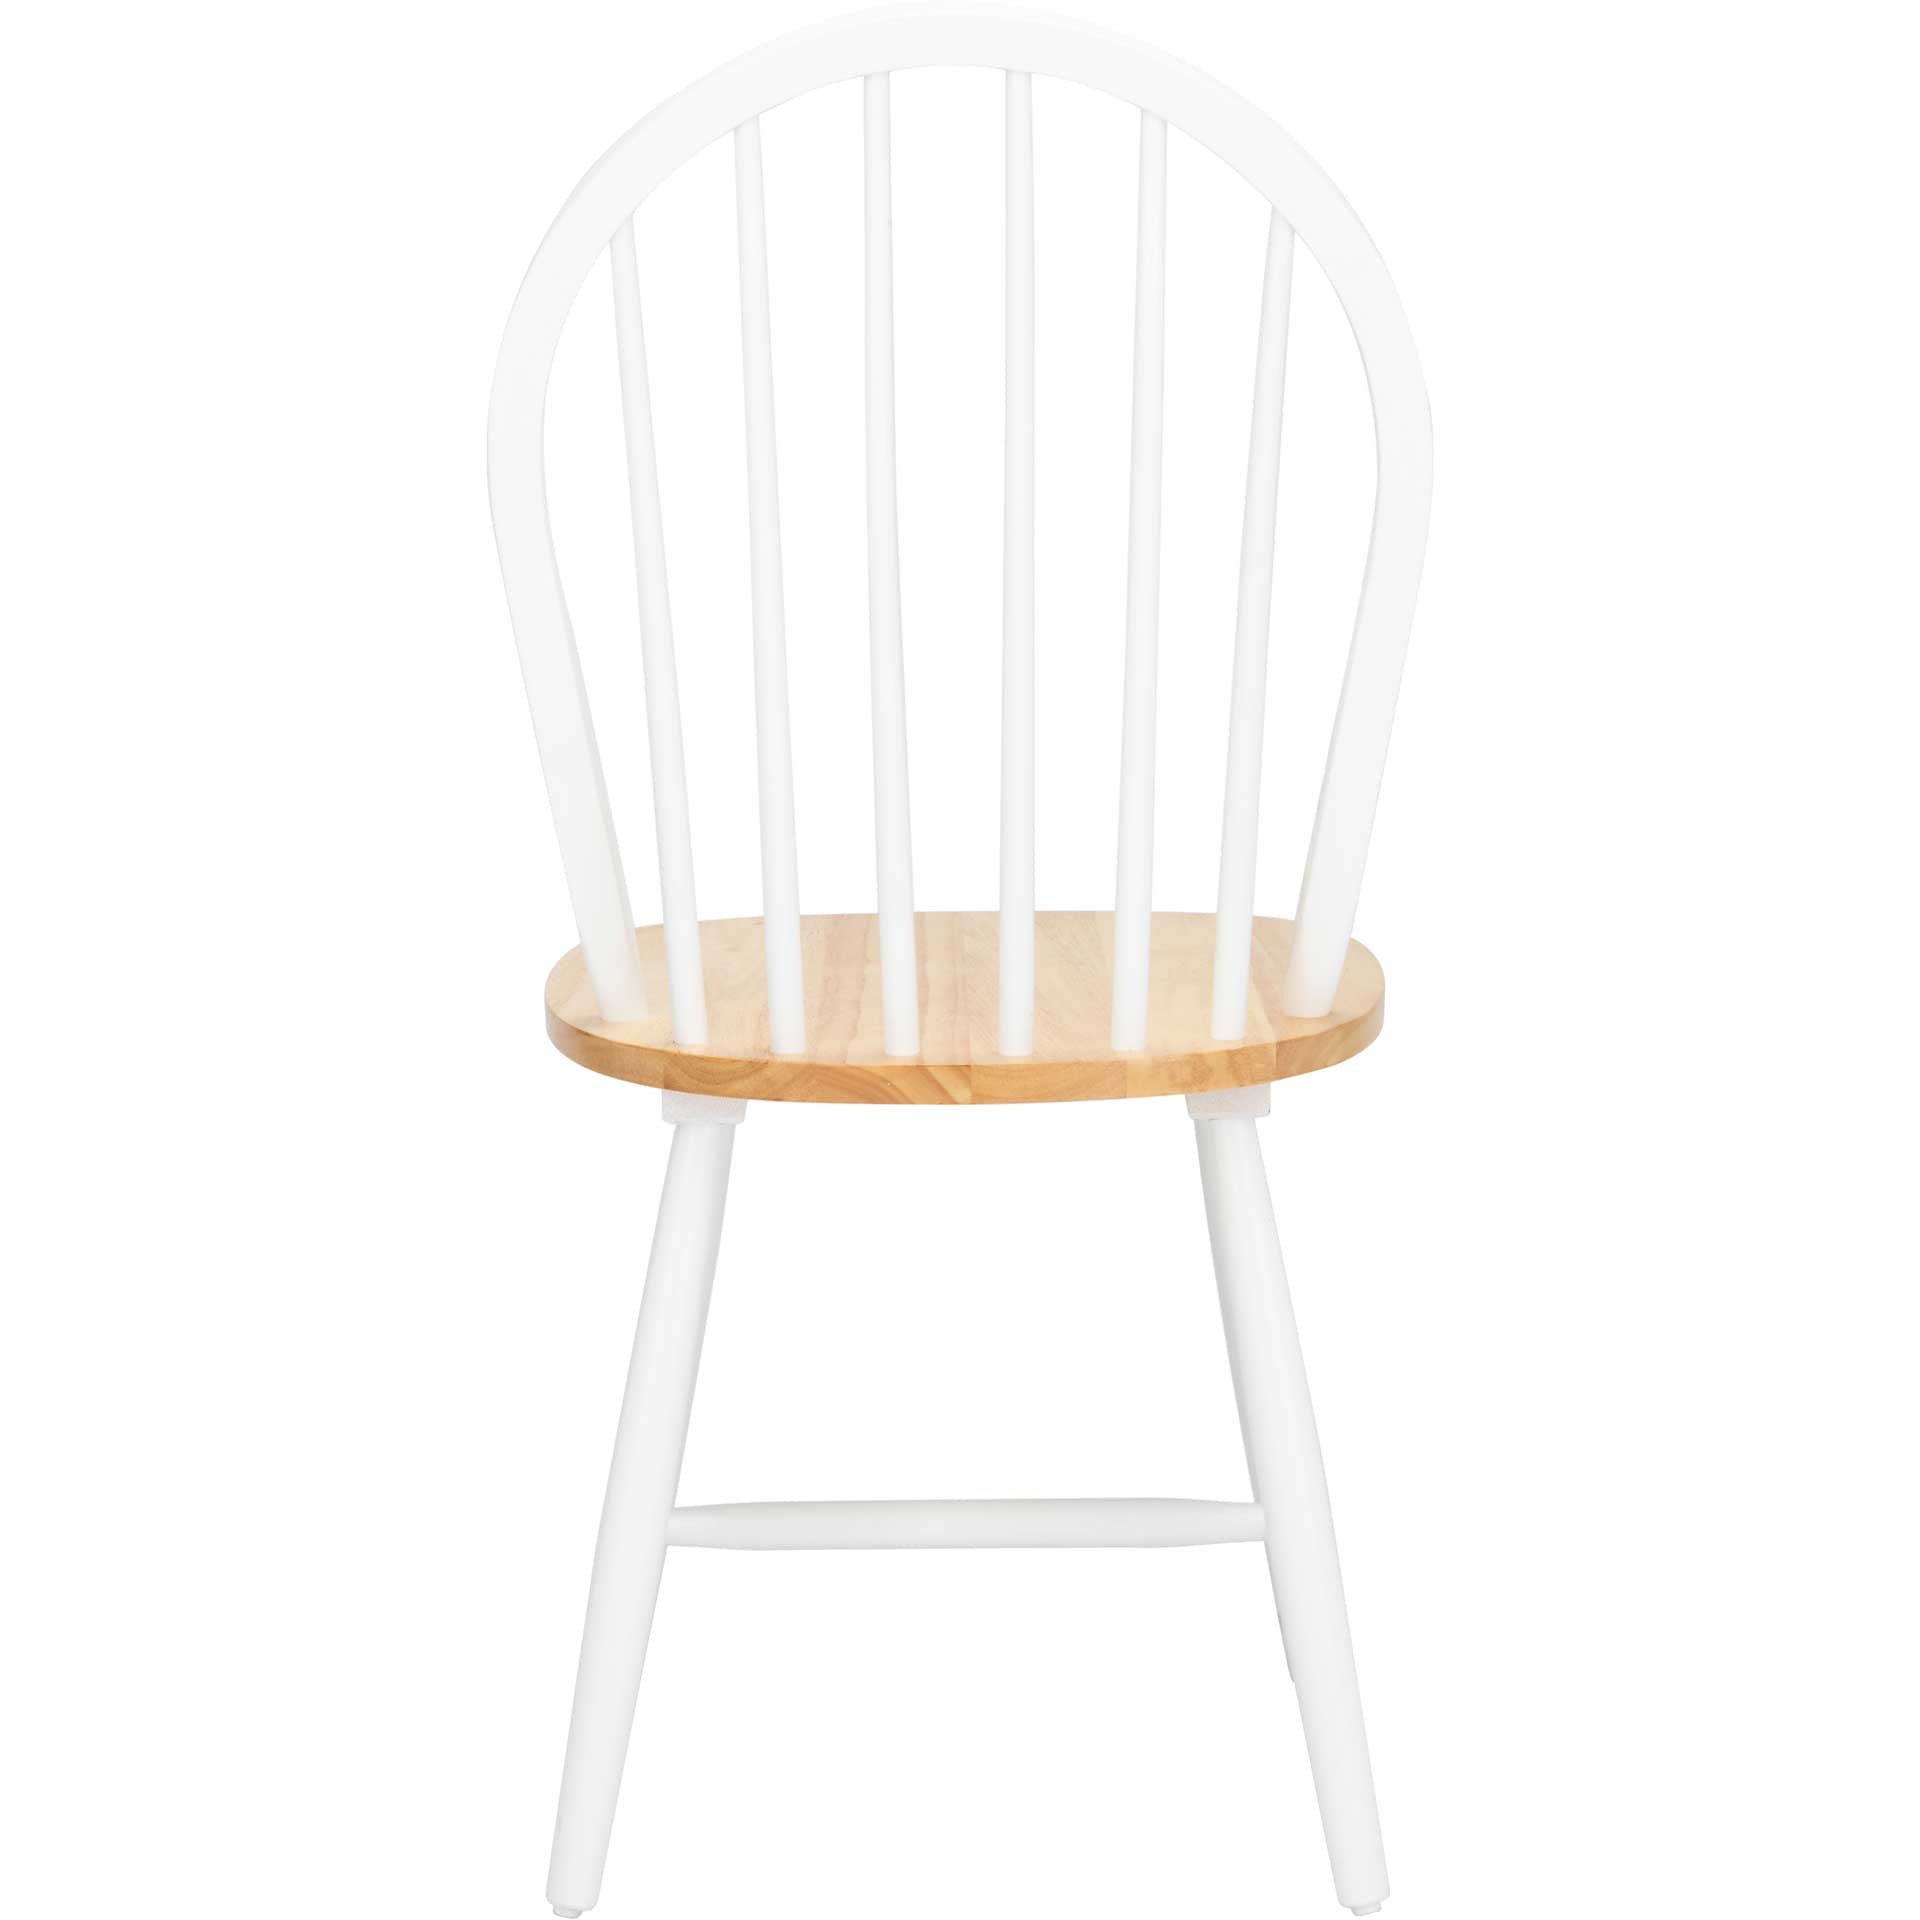 Calista Spindle Back Chair White/Natural (Set of 2)